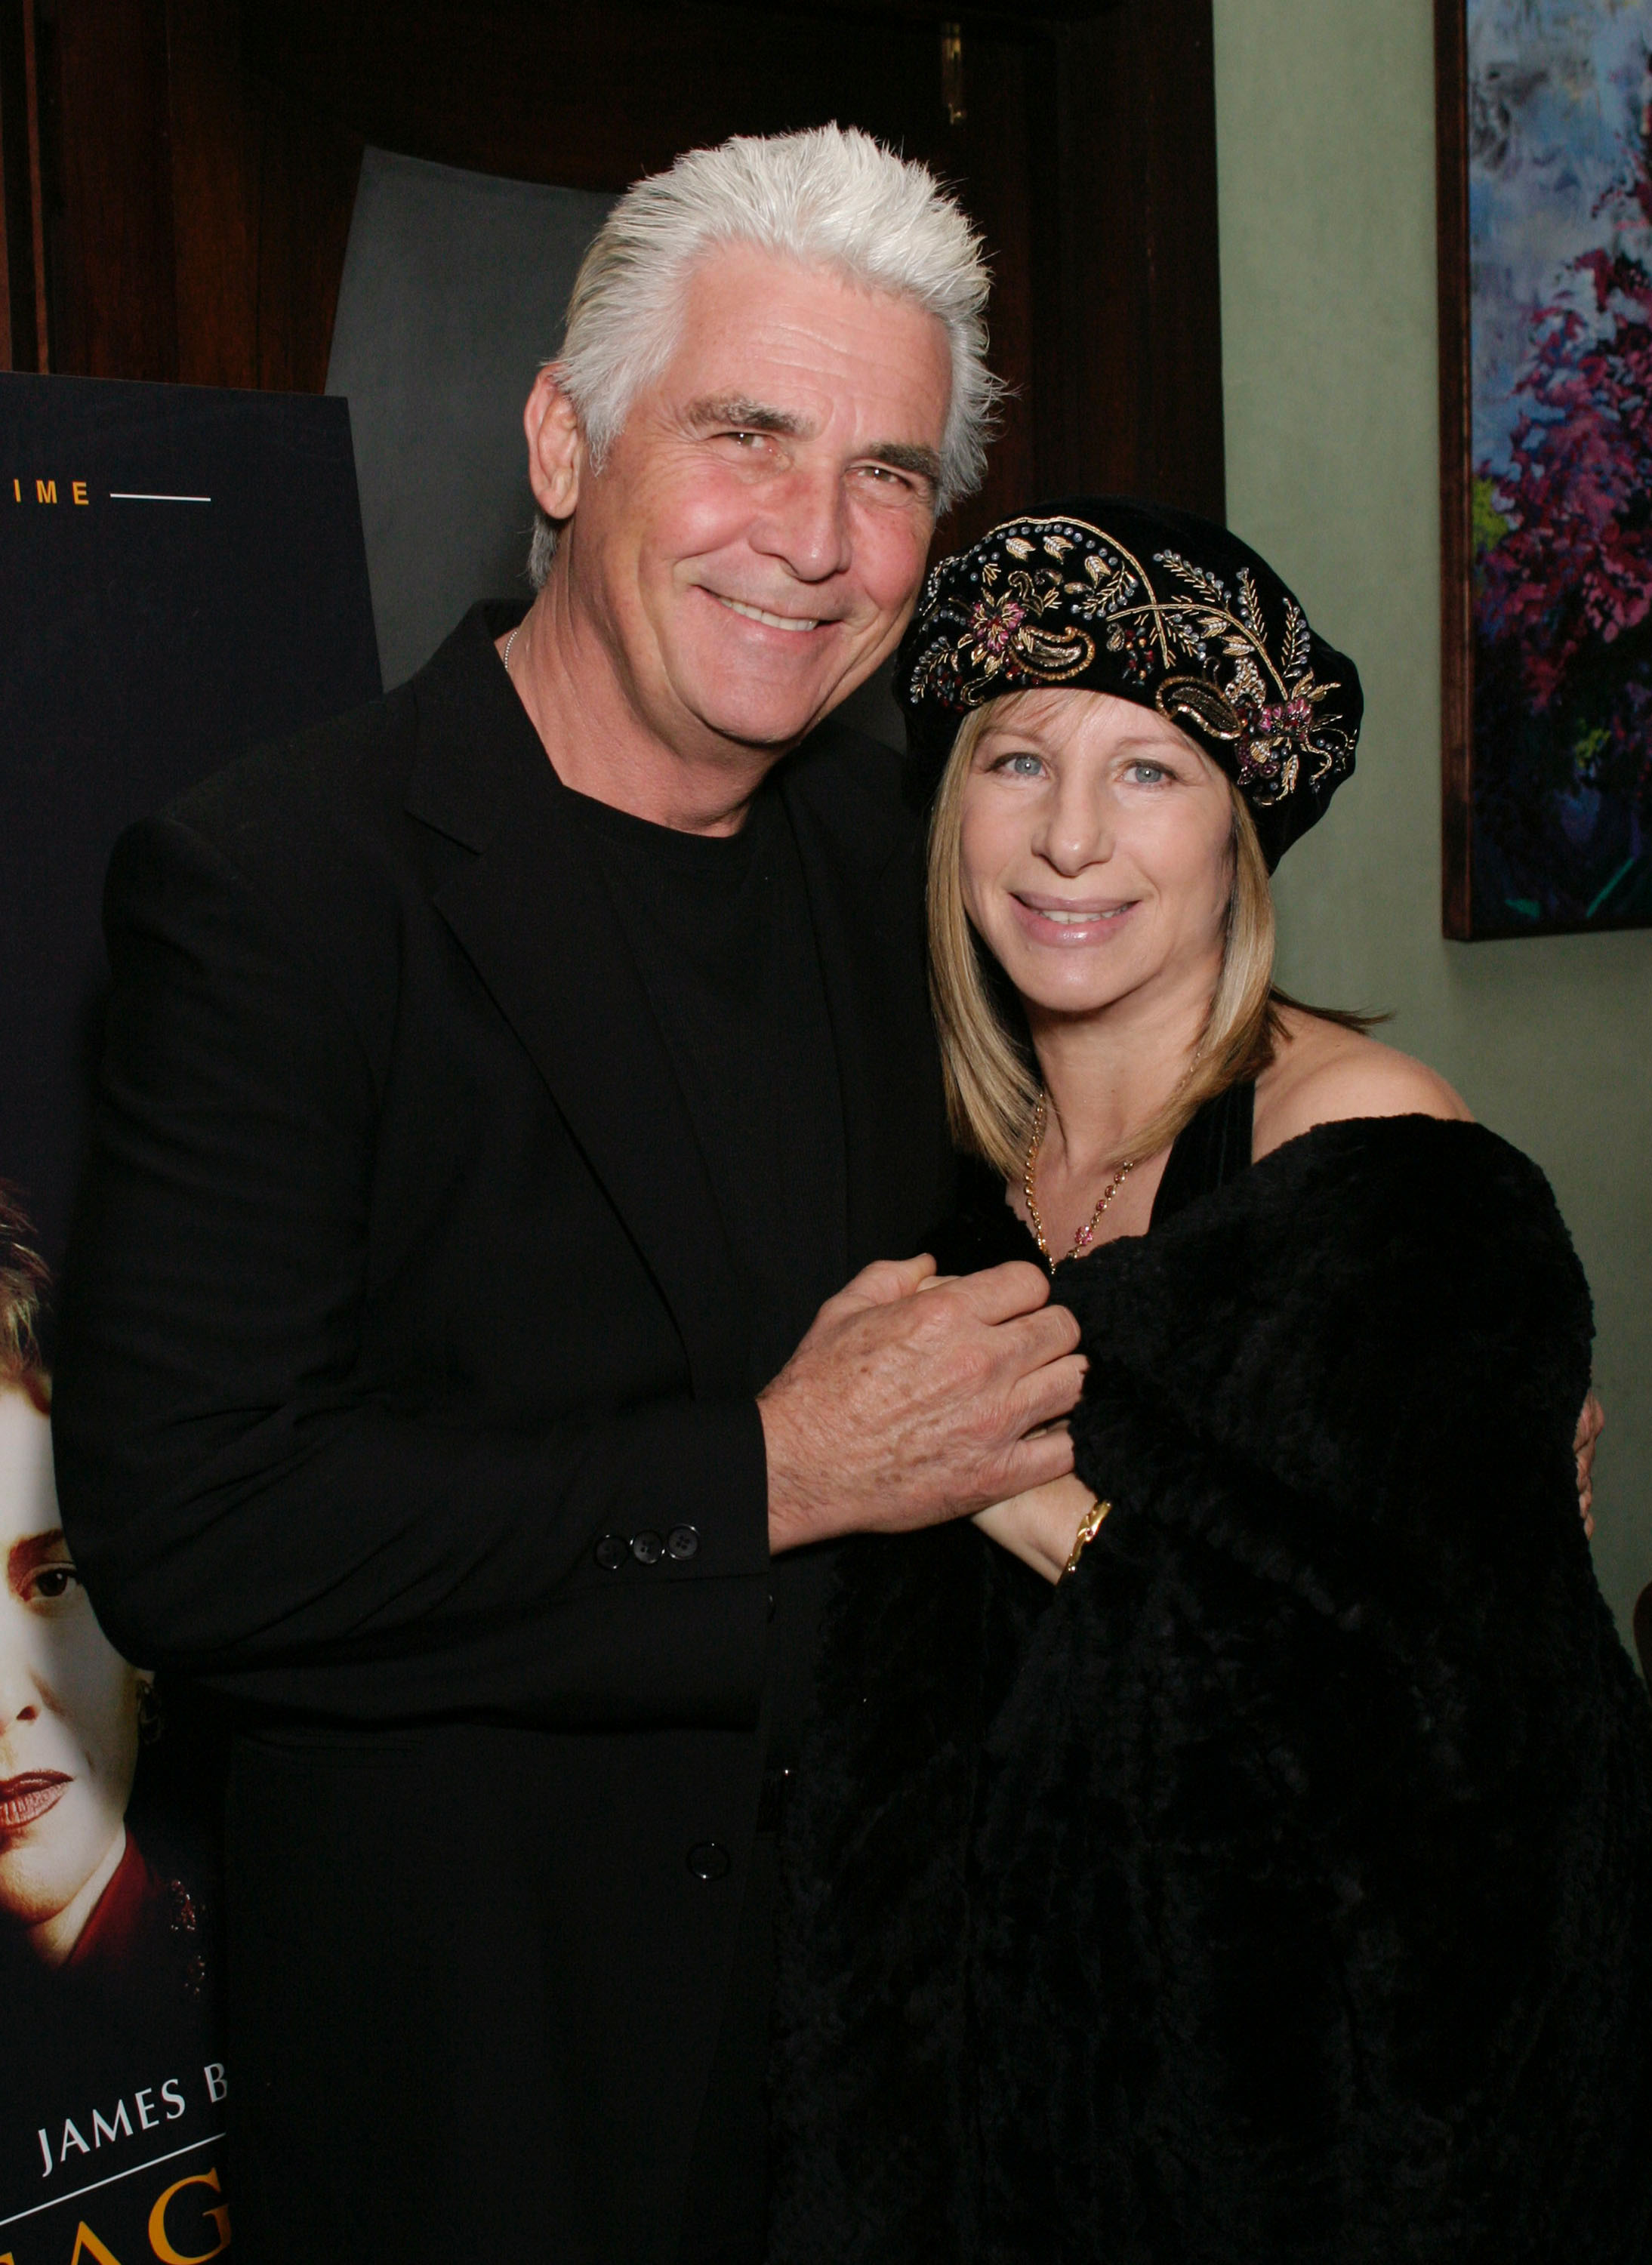 James Brolin and Barbra Streisand at Showtime's Pre Golden Globe Party in Hollywood, California on January 24, 2004 | Source: Getty Images